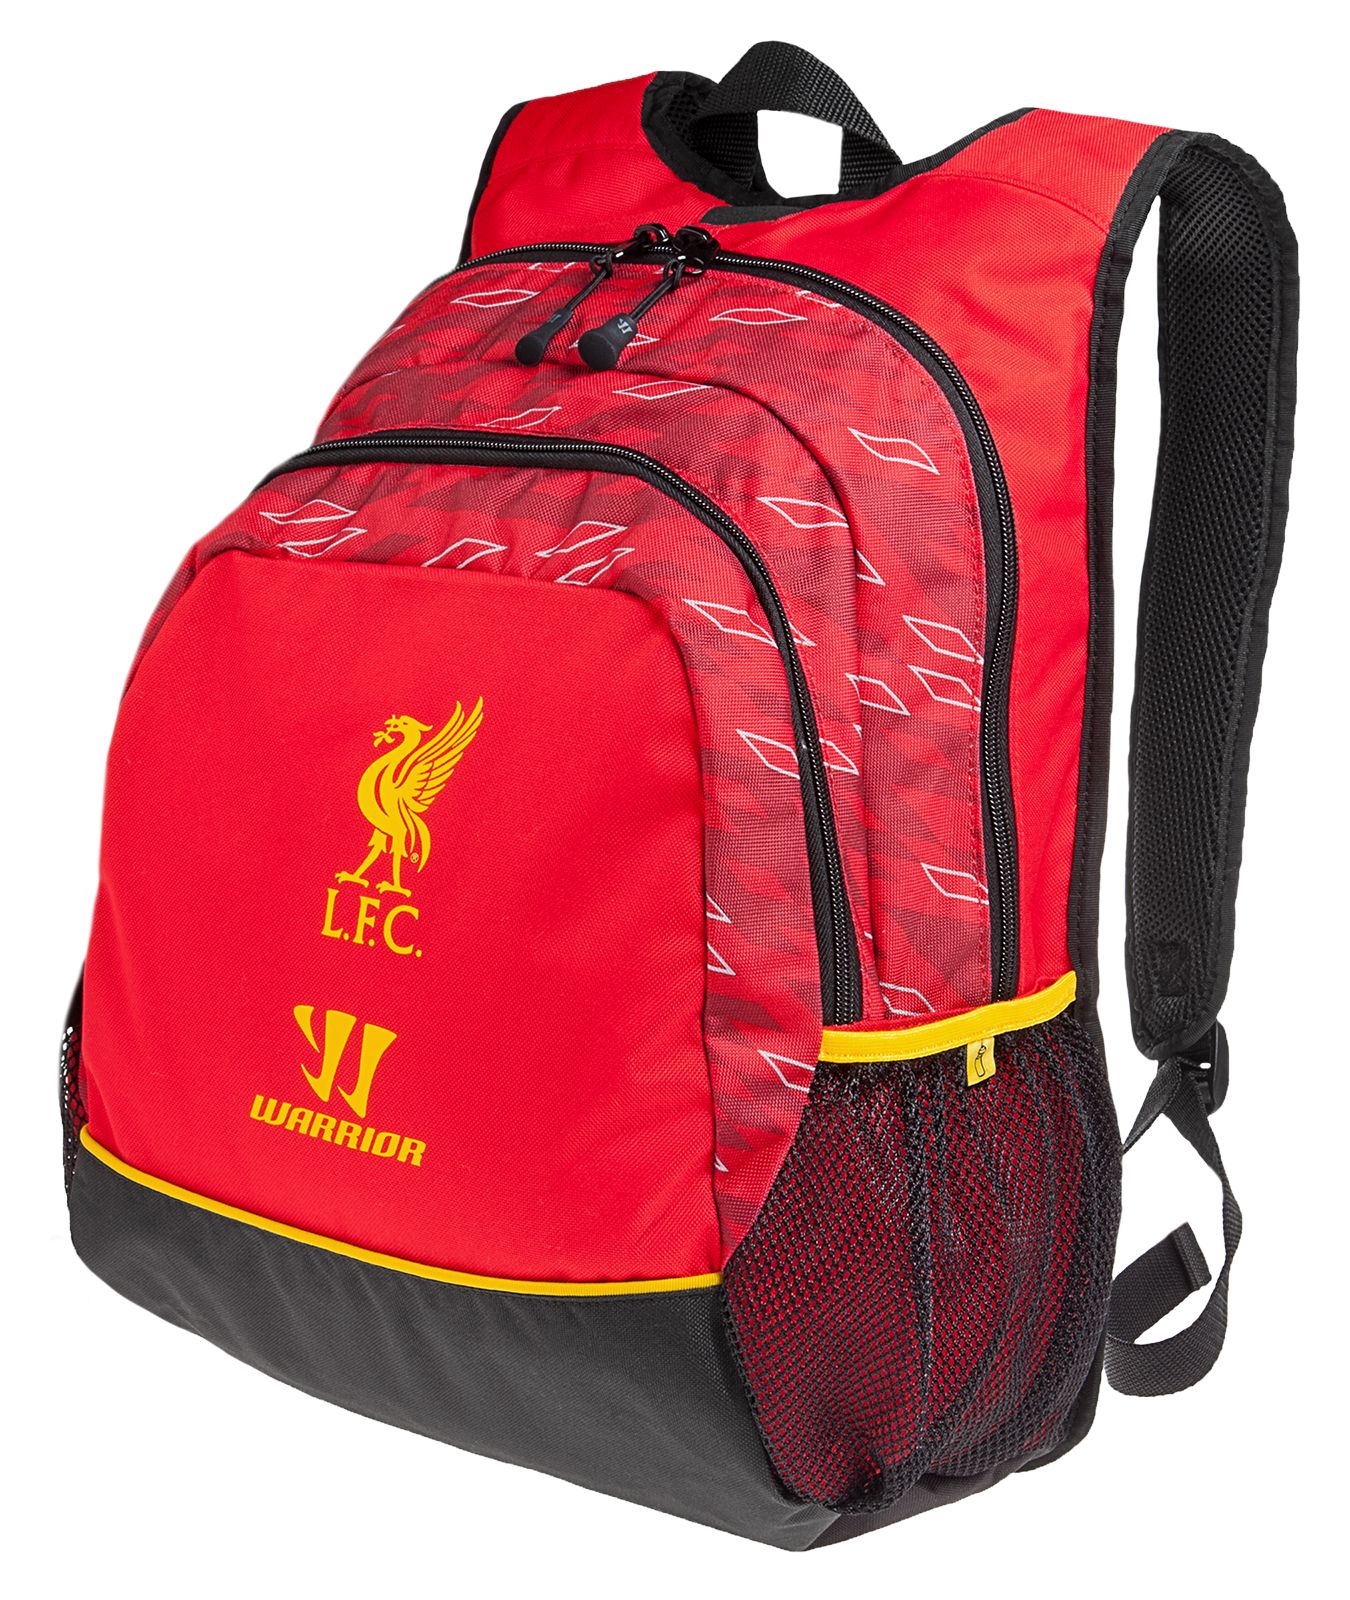 LFC Large Backpack 2013/14, High Risk Red with Amber Yellow image number 0